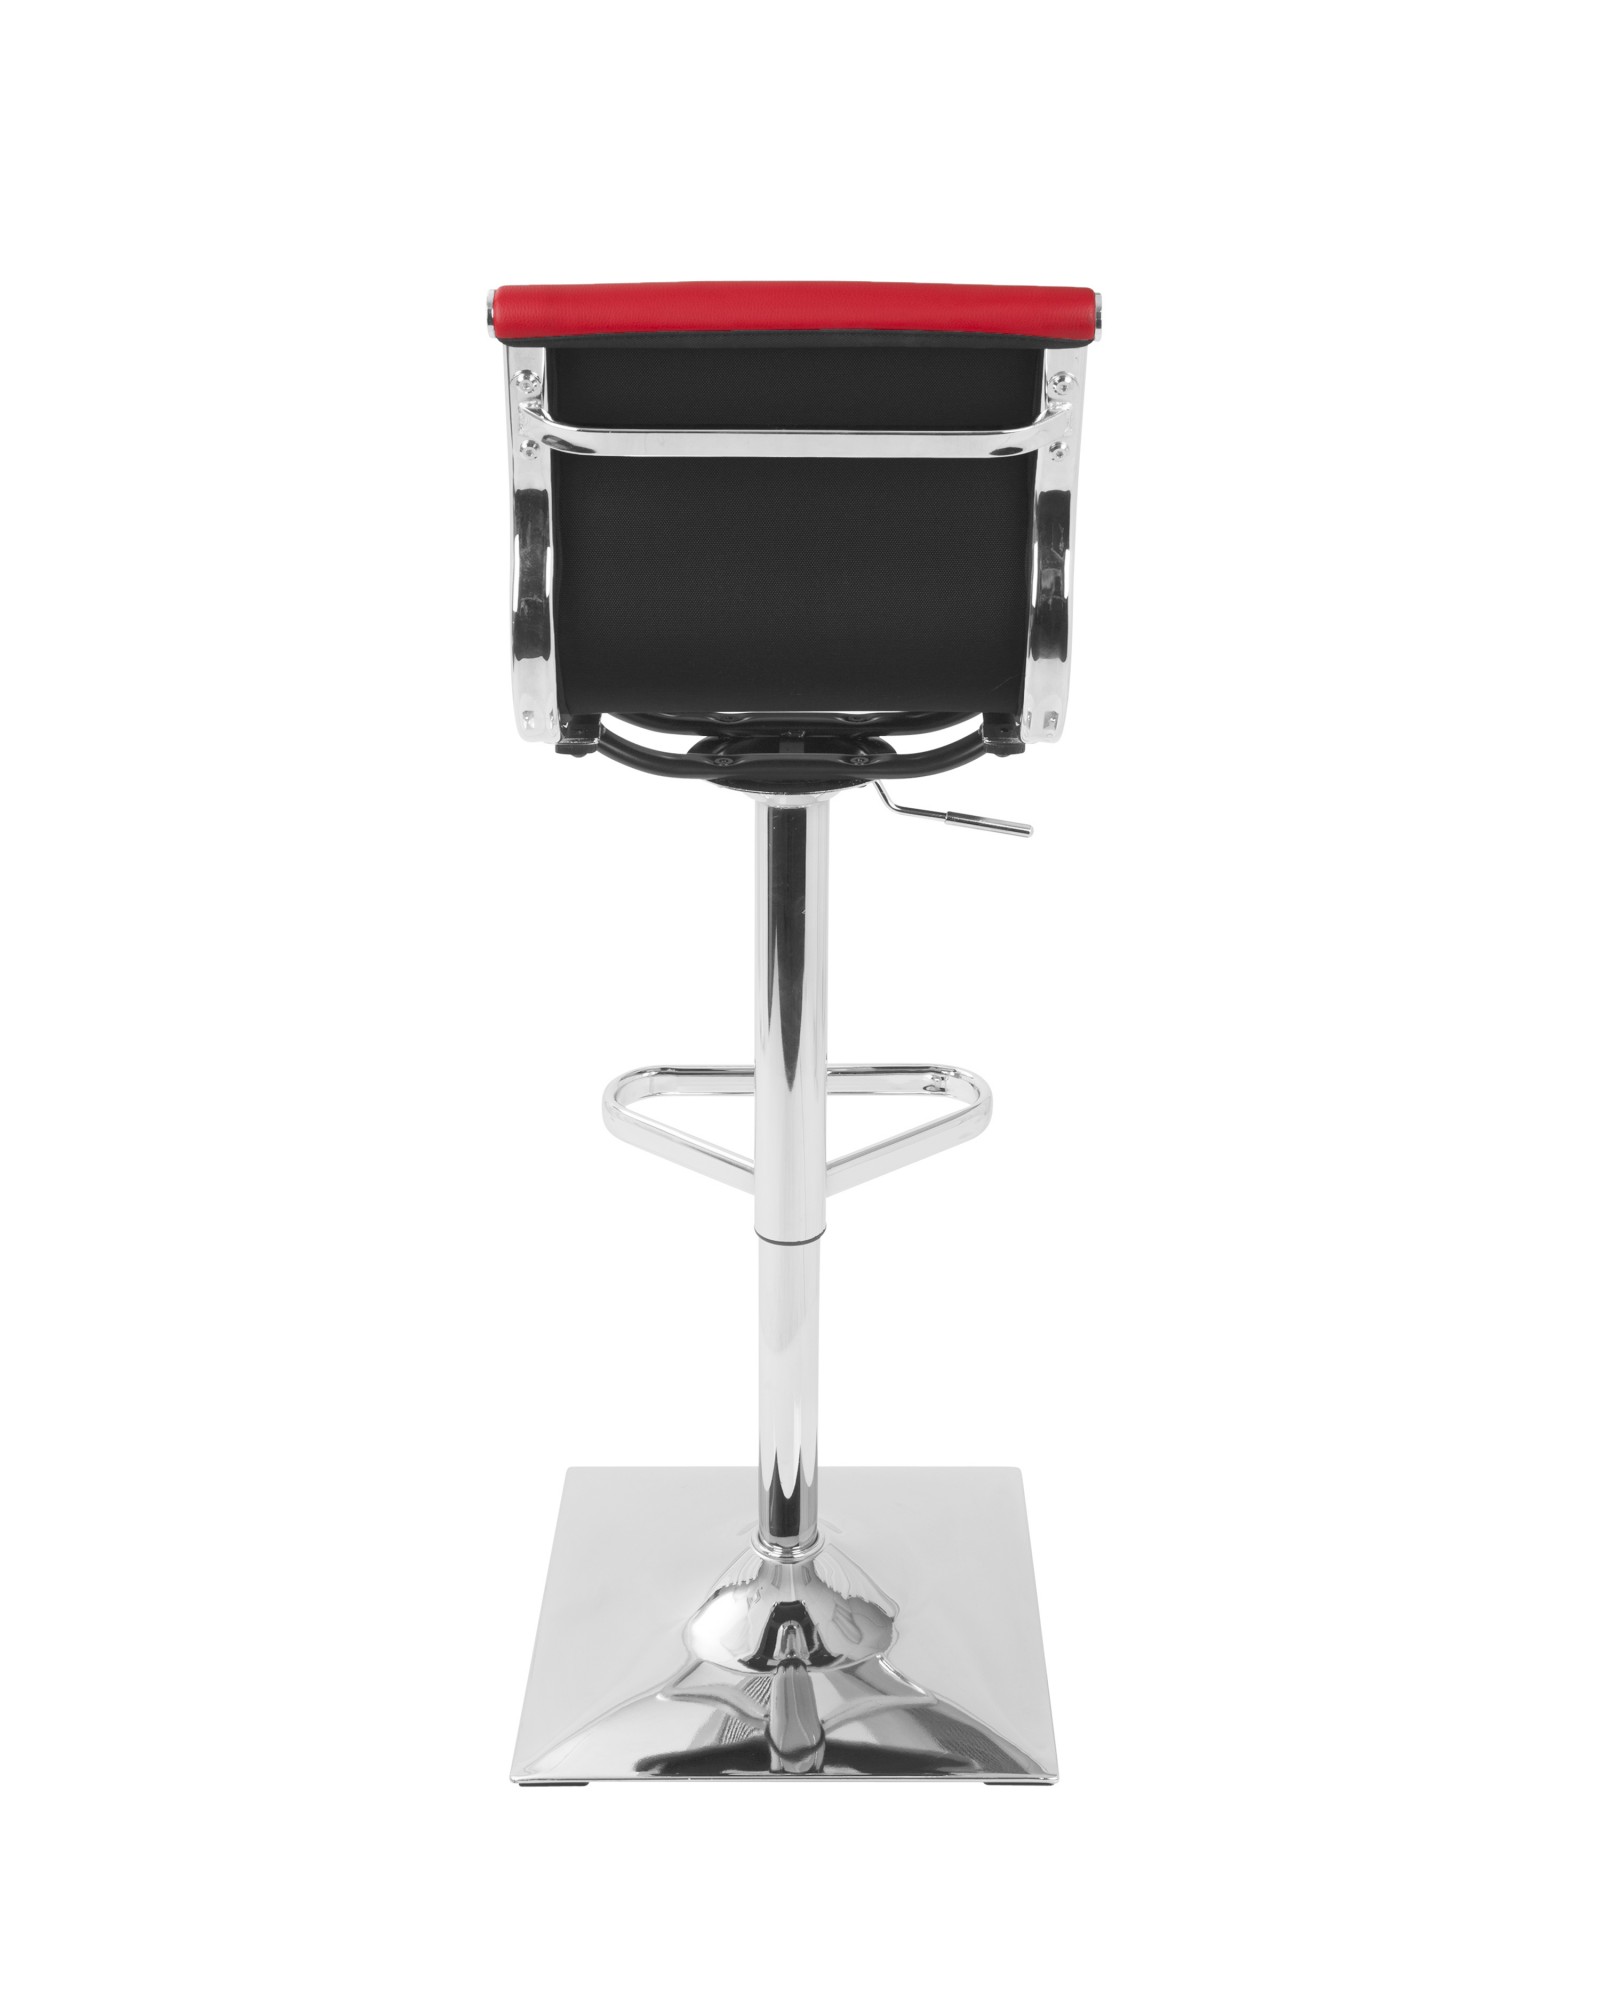 Masters Contemporary Adjustable Barstool with Swivel in Red Faux Leather